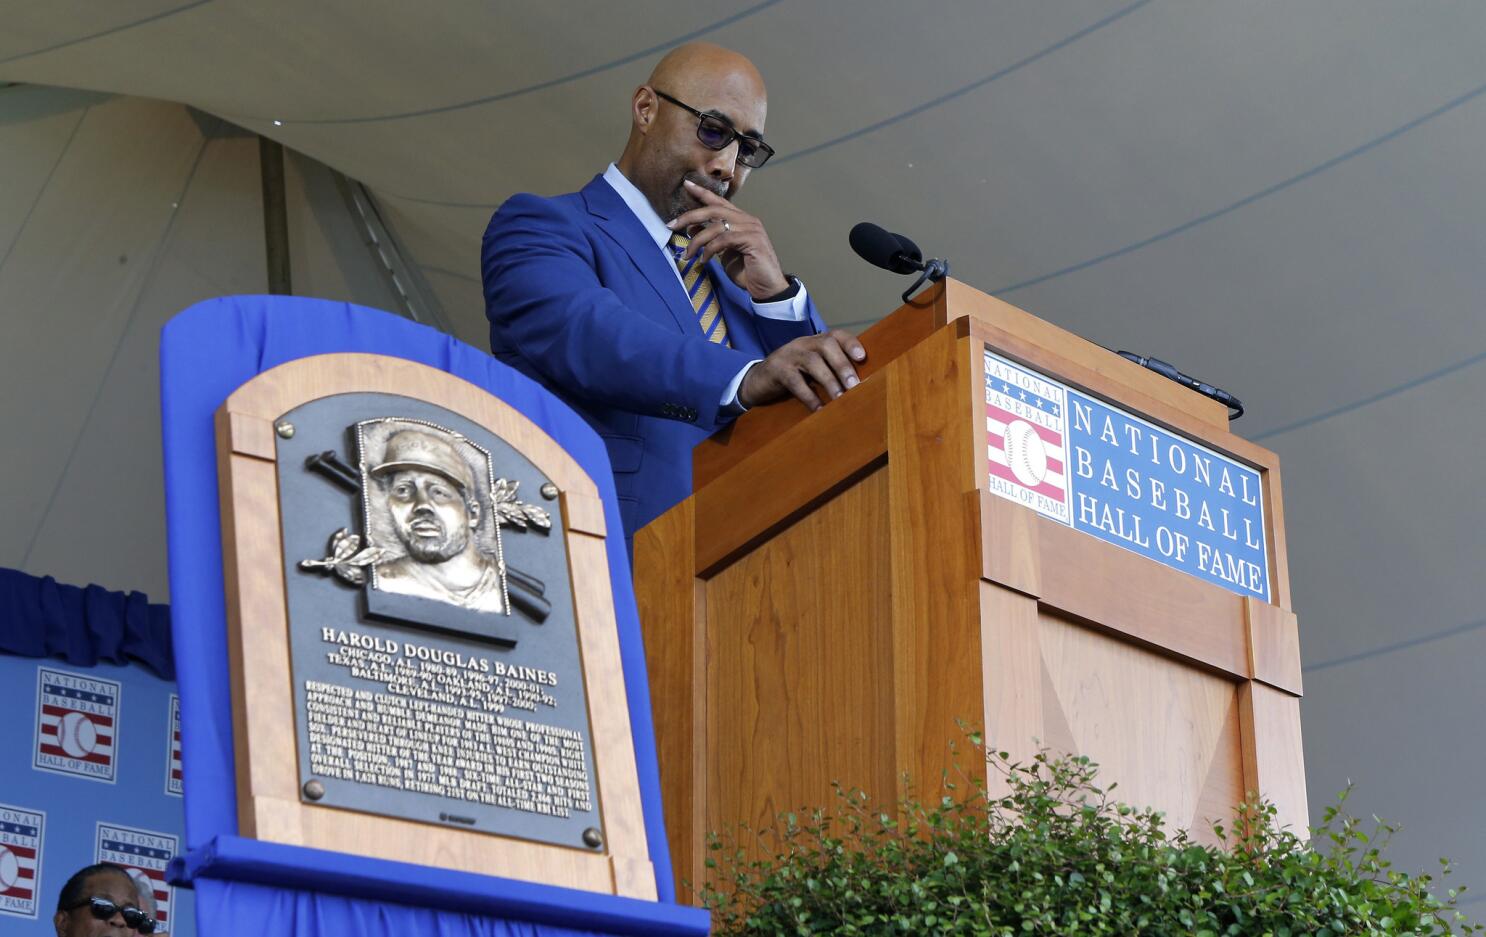 Former White Sox slugger Harold Baines inducted into Baseball Hall